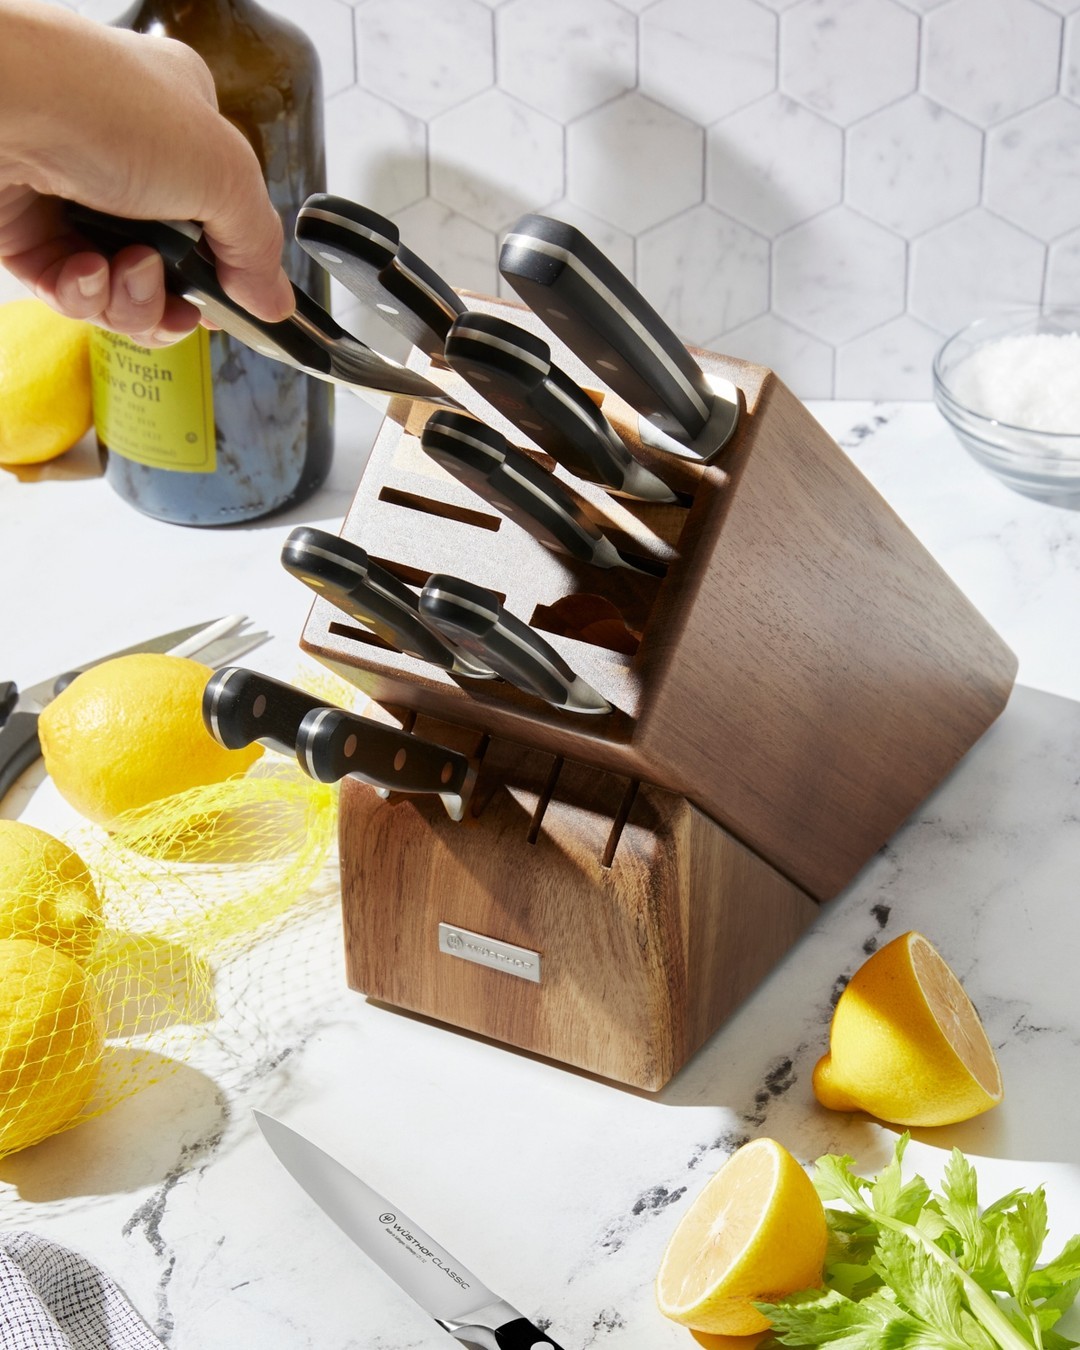 A hand reaching for a knife block